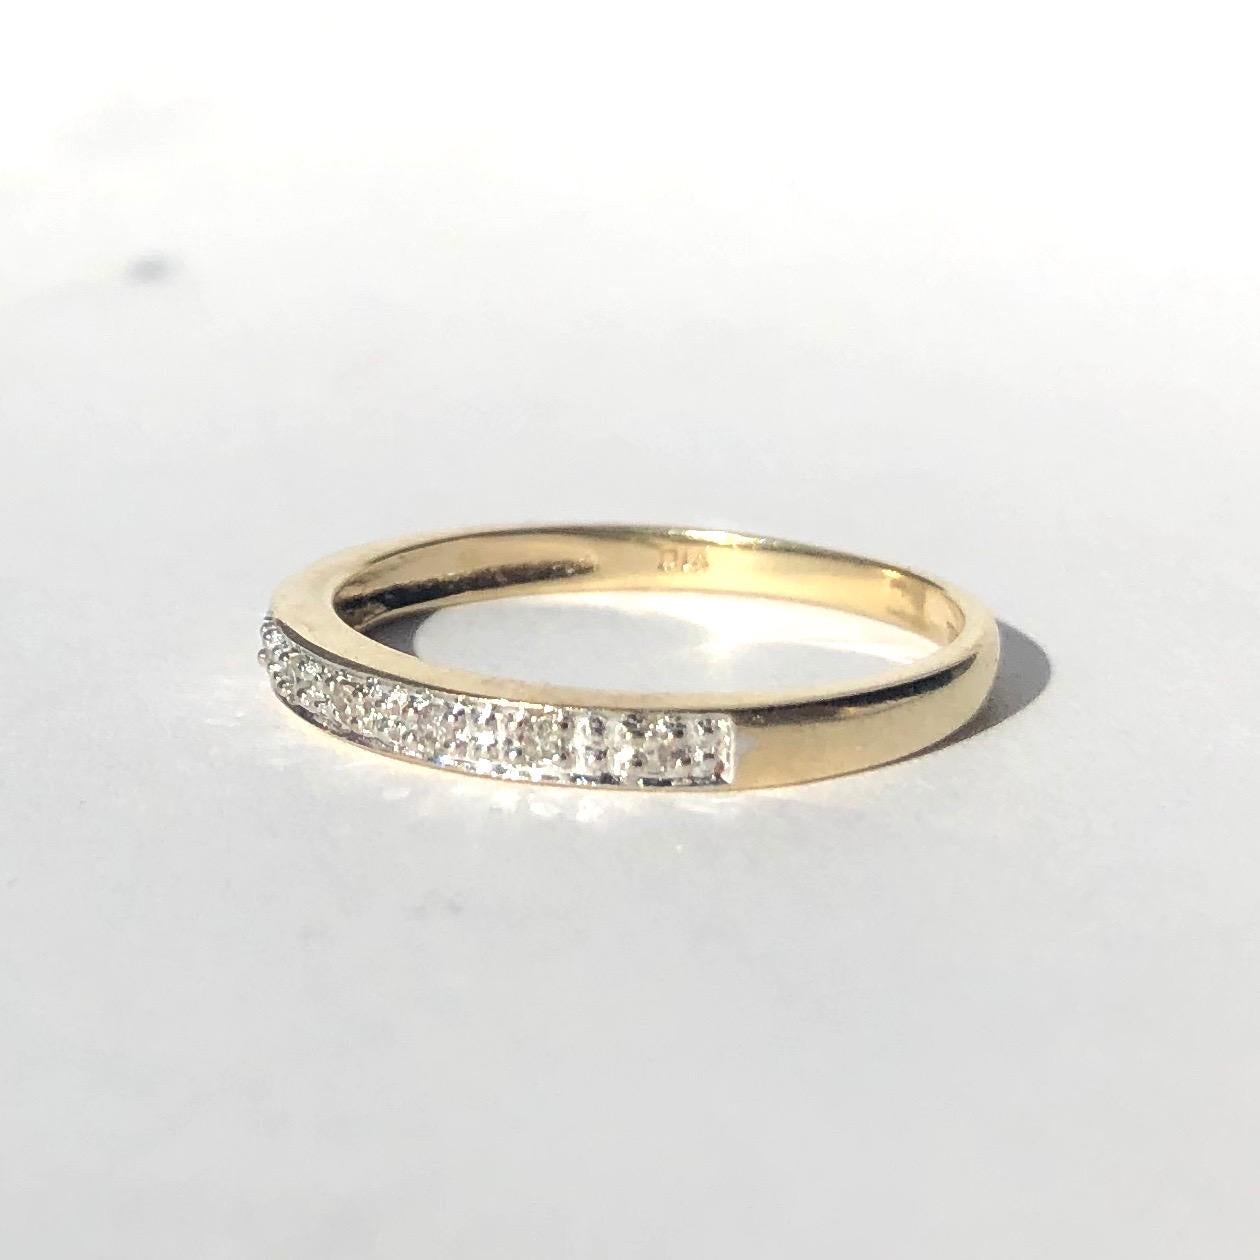 The eight diamonds measure 2pts each and are set in platinum which gives the illusion of a non stop row of diamonds. The diamonds are bright and sparkly and the platinum next to the 9 carat gold give a modern look to the ring. 

Ring Size: N 1/2 or